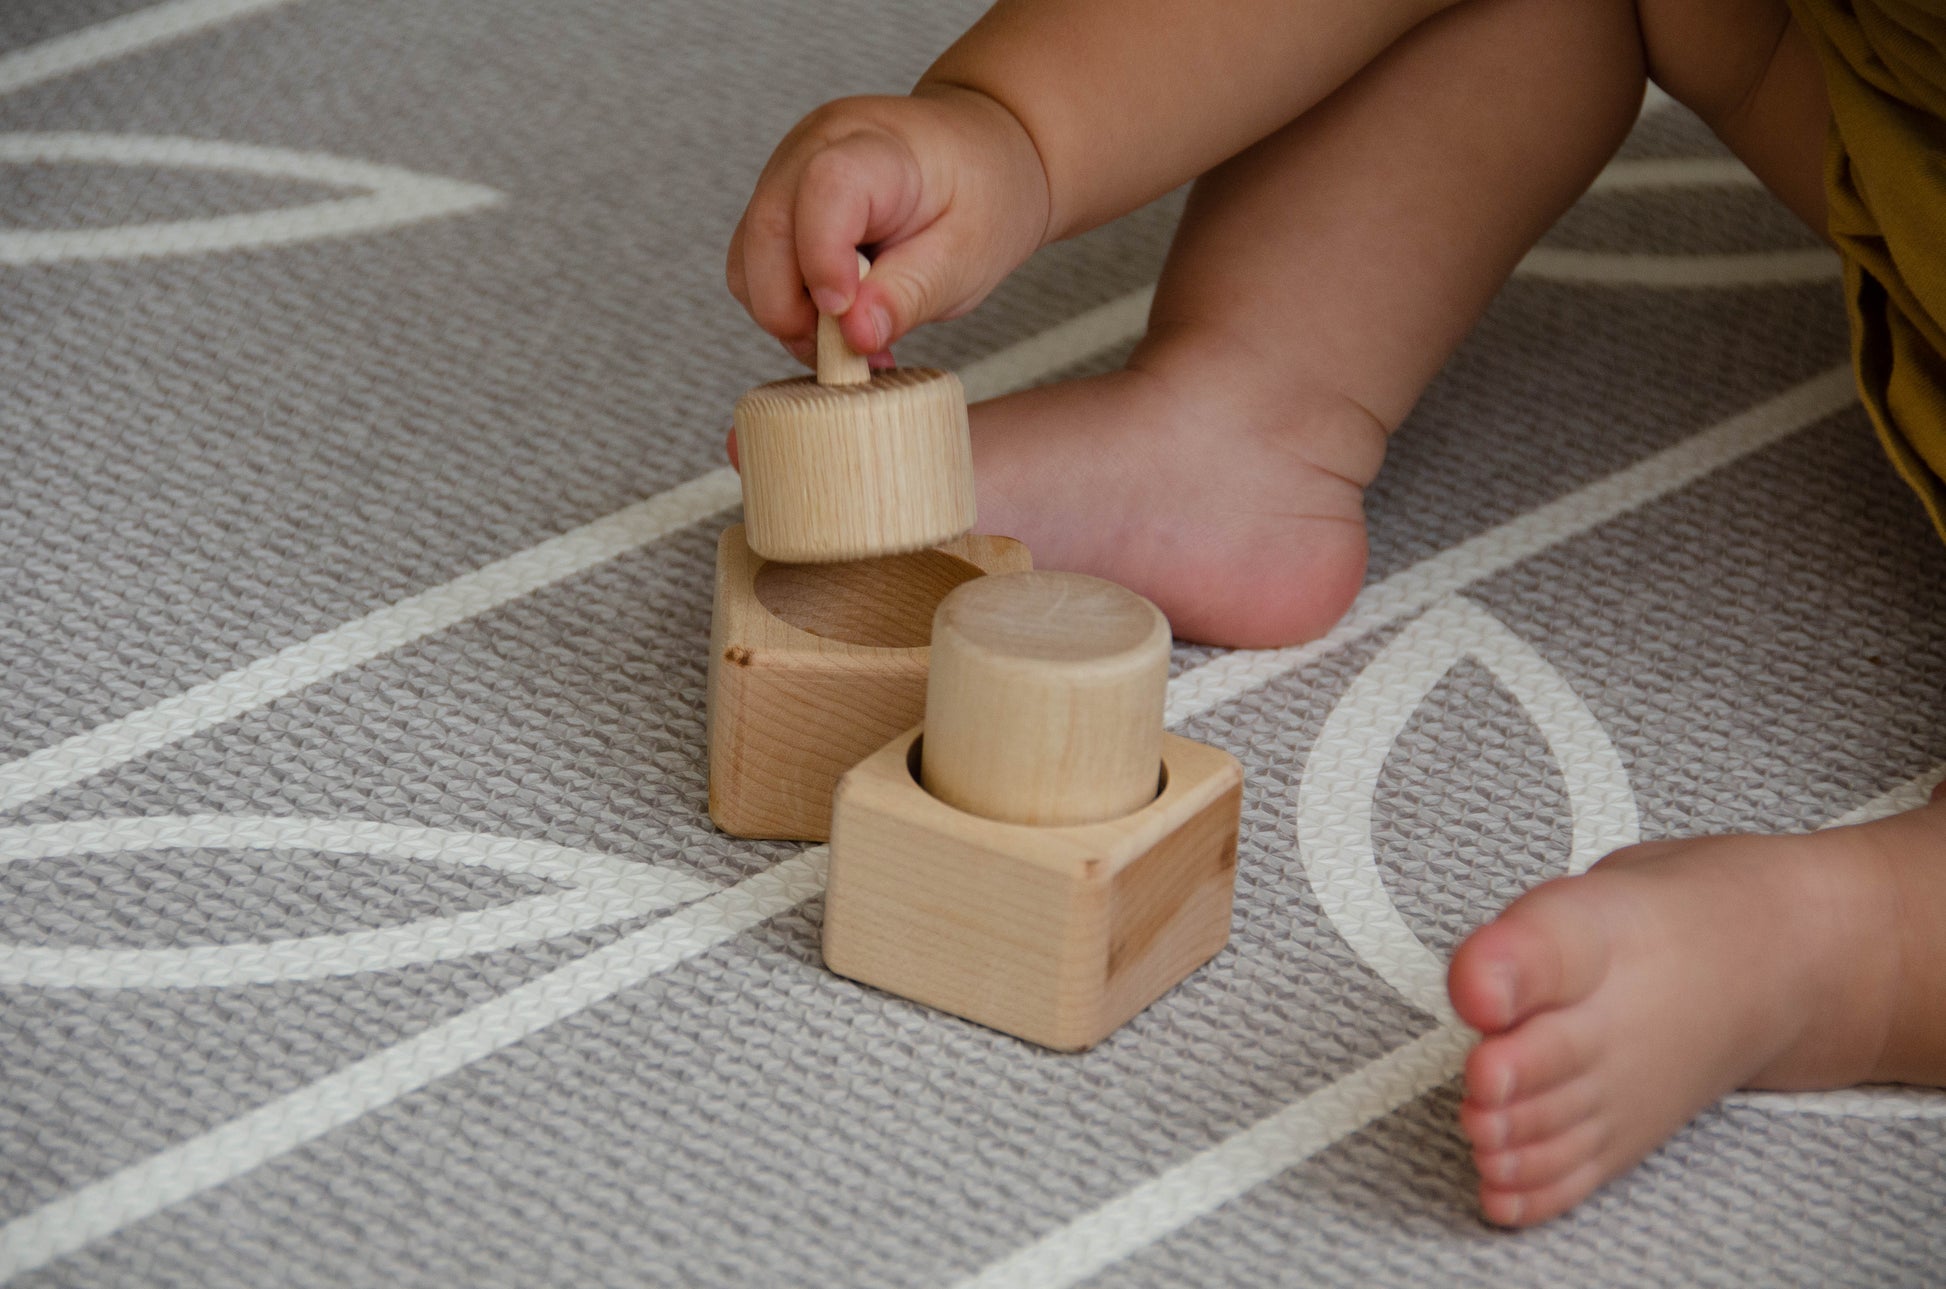 The baby girl is thoroughly enjoying her playtime with Cubos Pincer & Palmer Block. With her tiny hands, she skillfully manipulates the blocks, using the pincer grip to grasp and place them. This interactive and tactile play enhances her fine motor skills, hand-eye coordination, and cognitive development as she explores the different shapes and builds various structures. Her joyful engagement with the educational toy fosters early learning and creativity, making playtime an enriching experience for her.